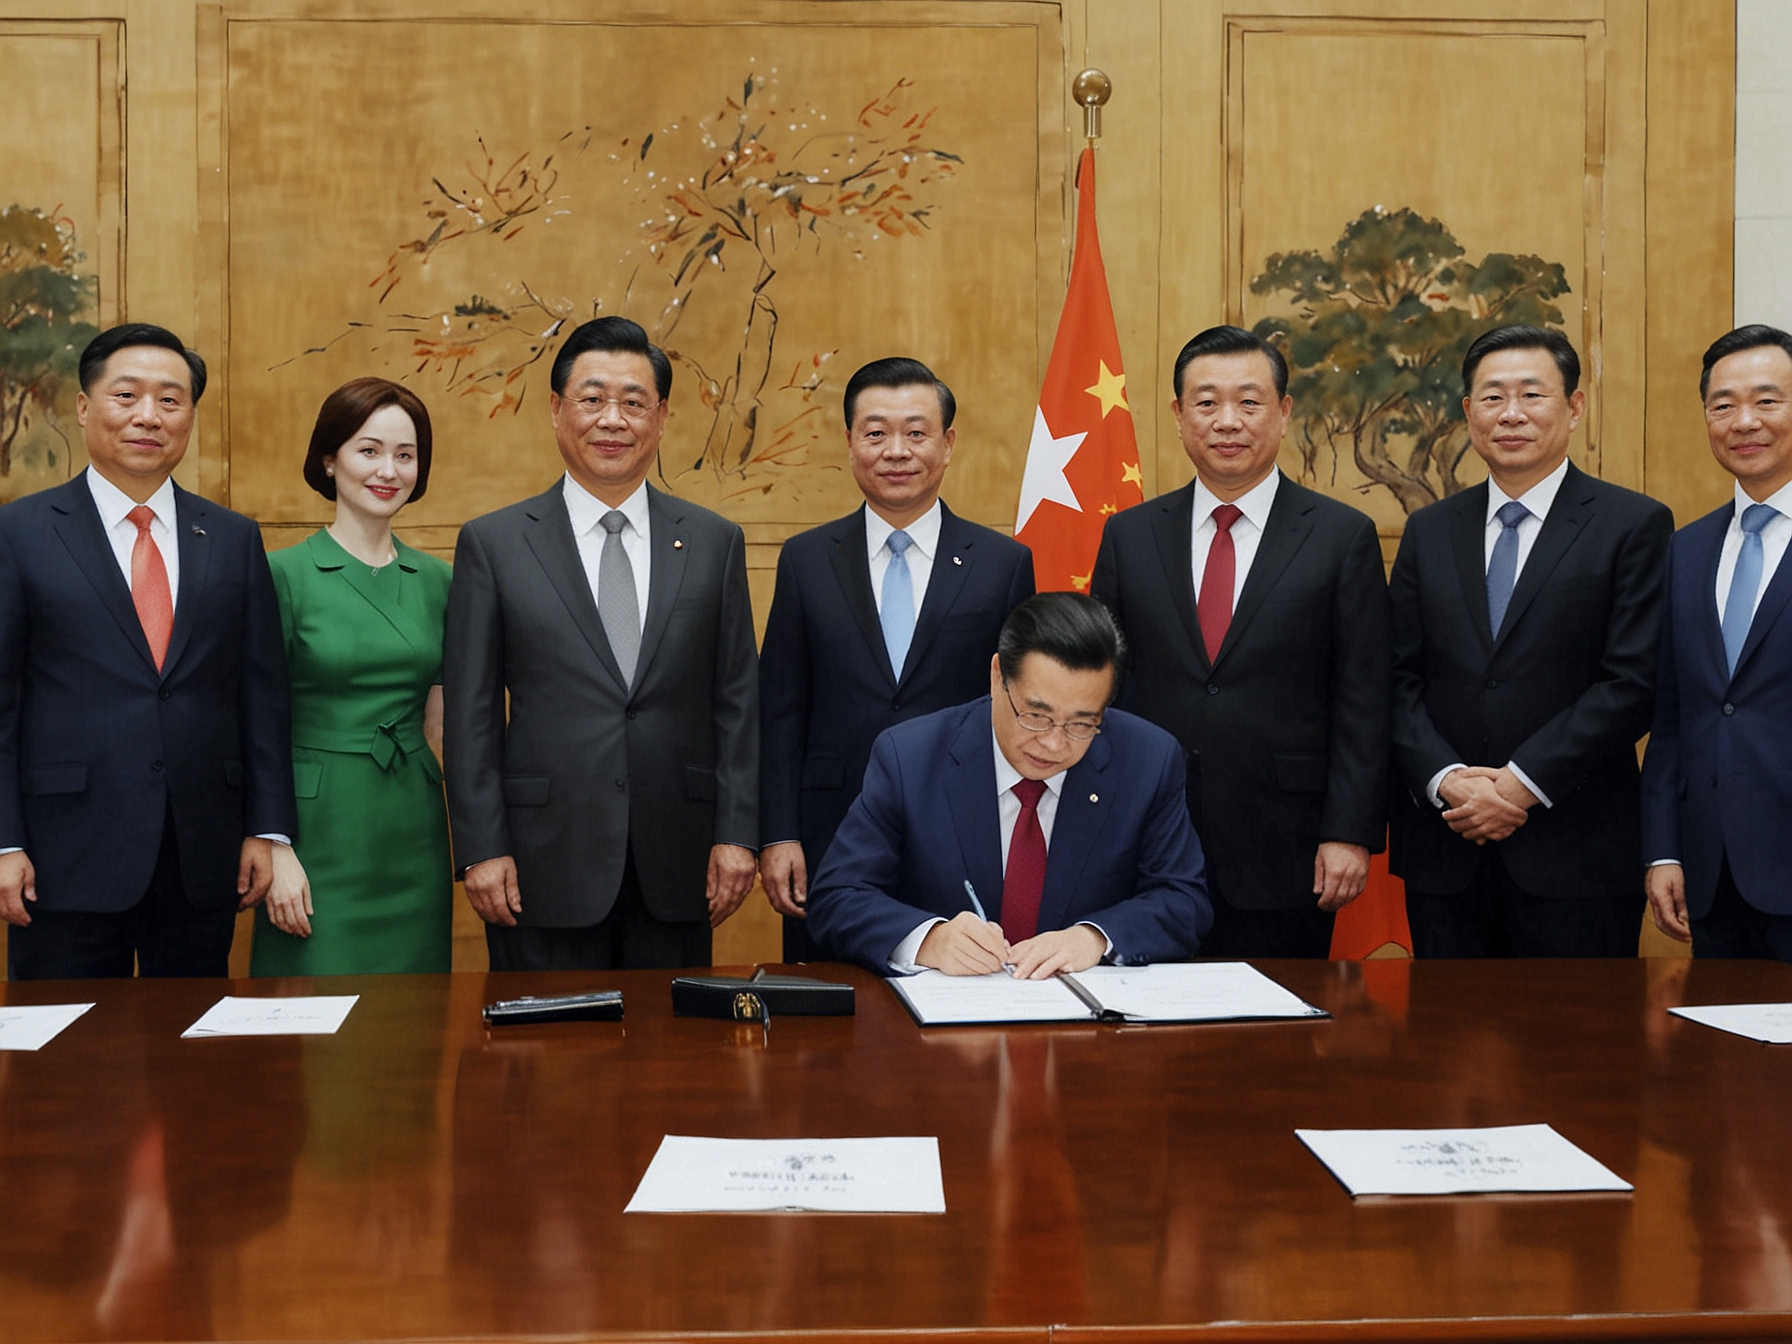 Chinese Premier Li Qiang and Australian officials engage in a signing ceremony, highlighting significant diplomatic efforts to improve bilateral relations after years of strain.